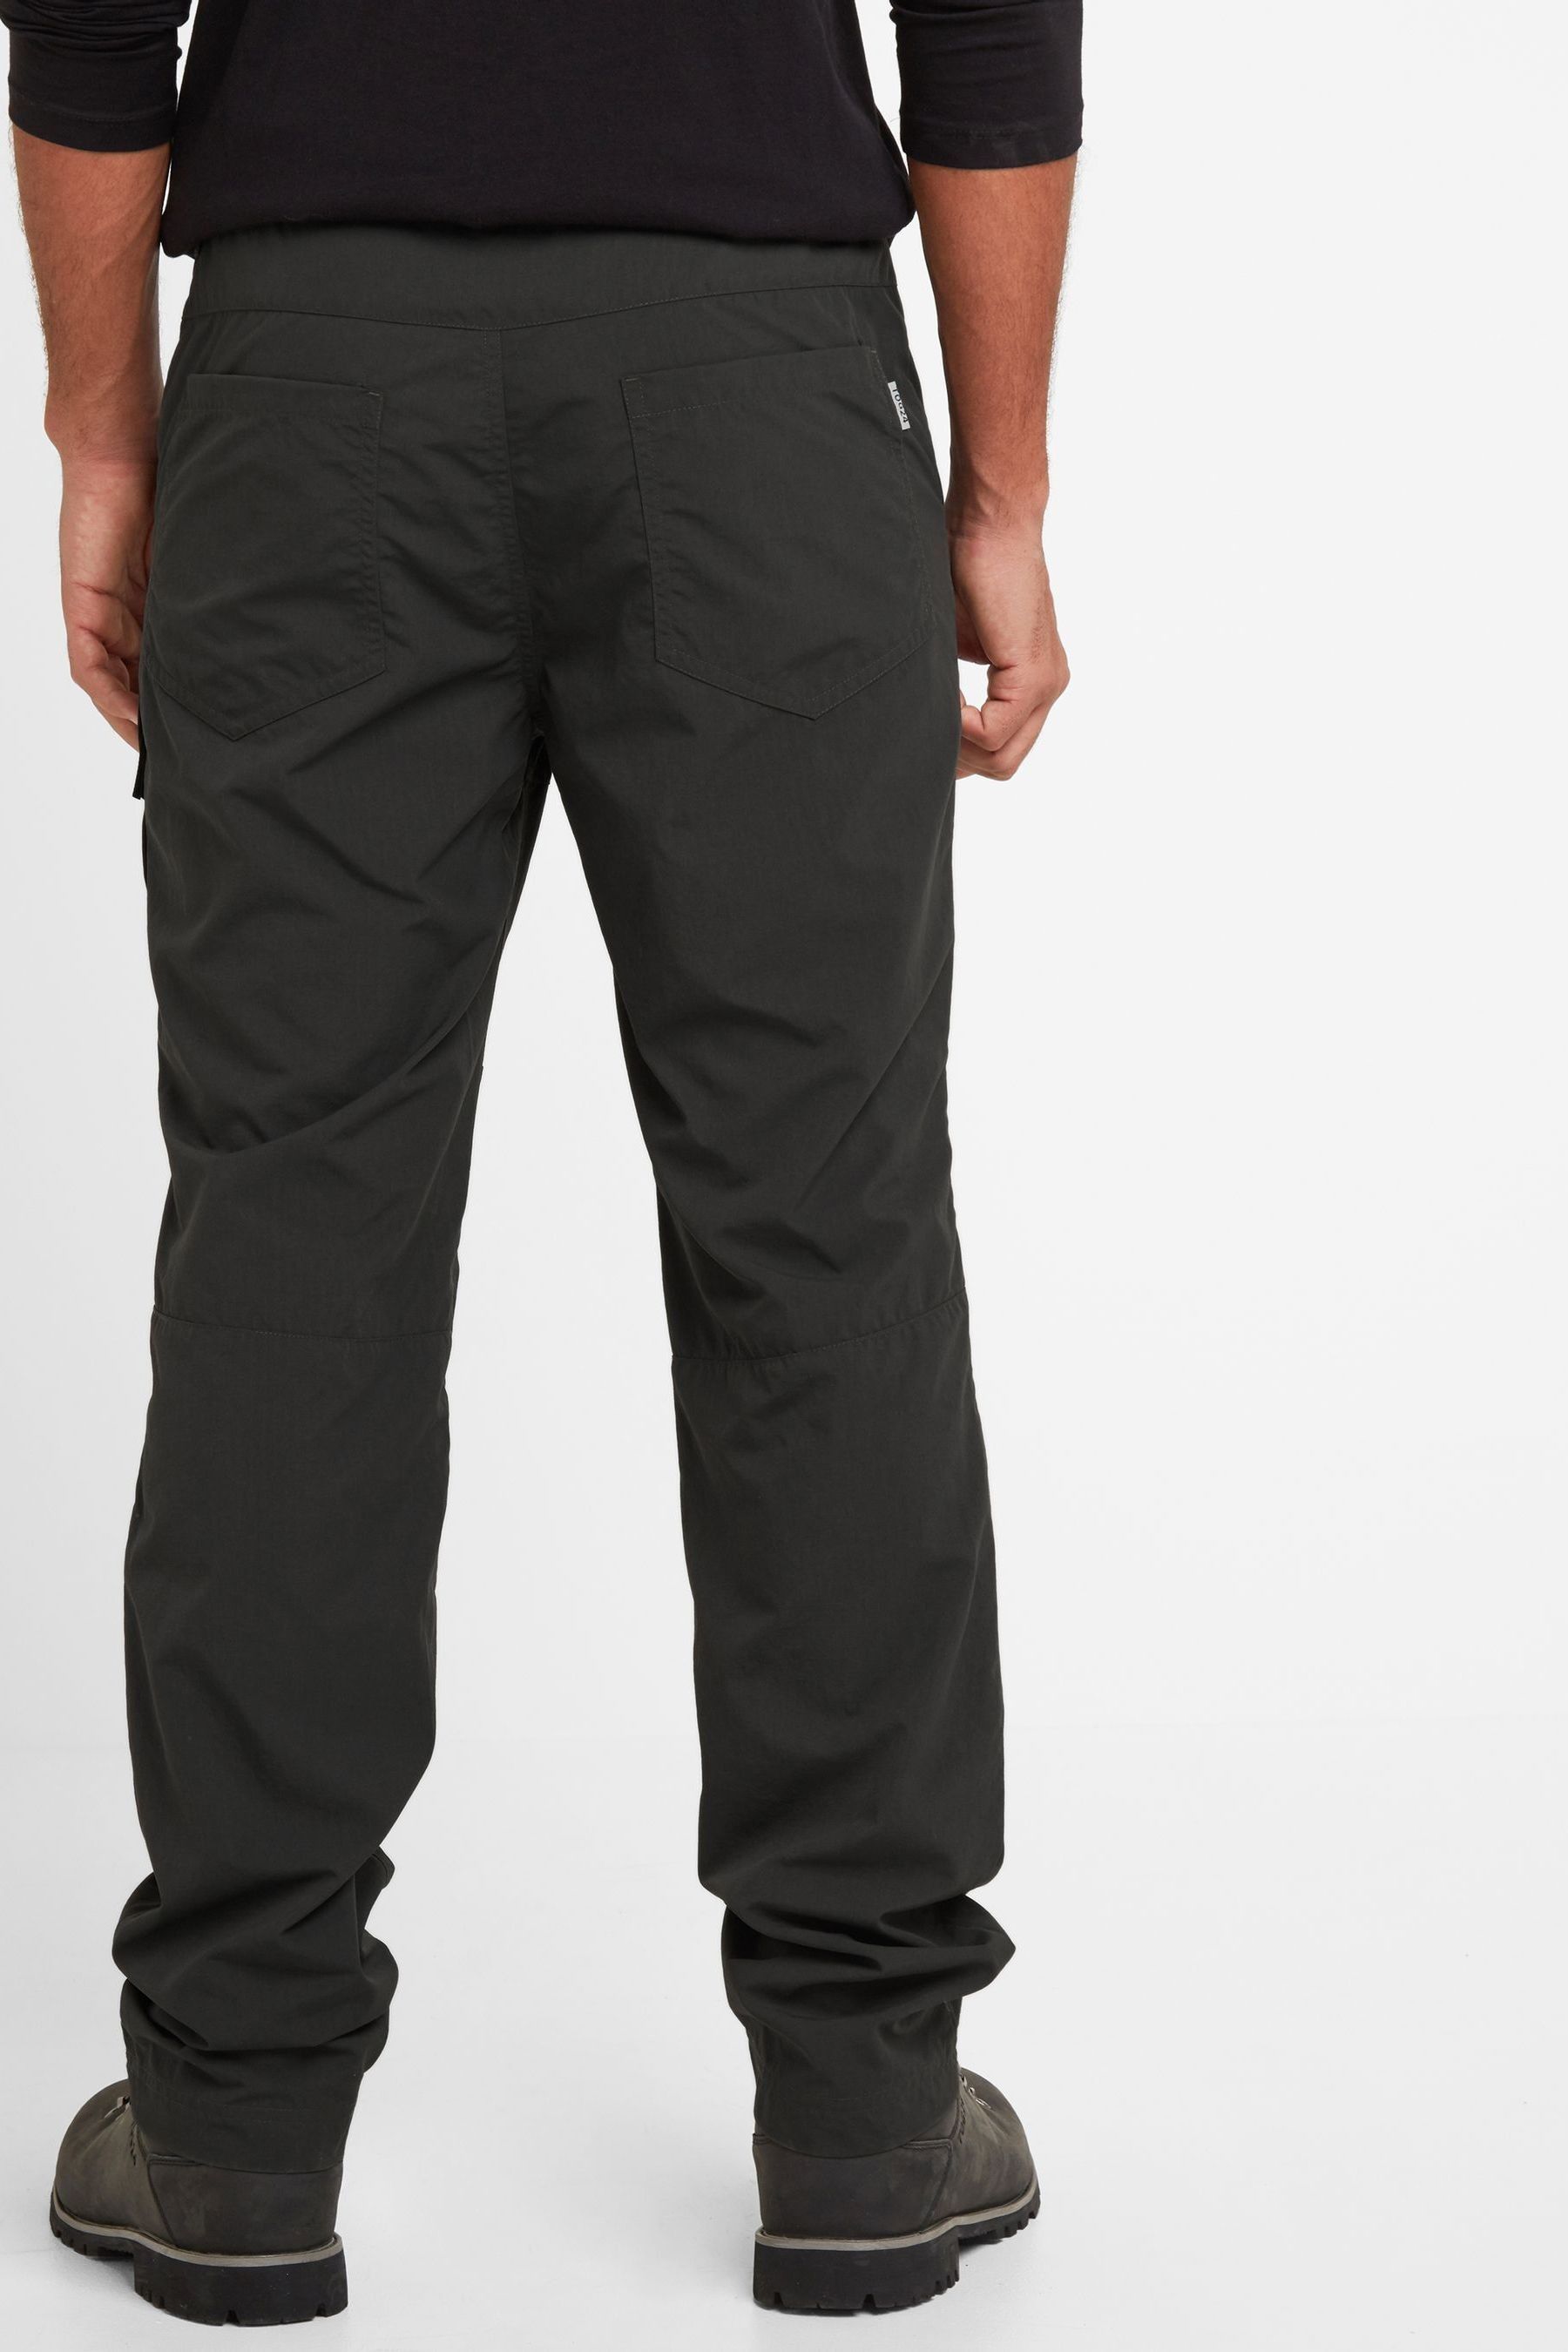 Buy Tog 24 Black Rowland Tech Short Walking Trousers from the Next UK ...